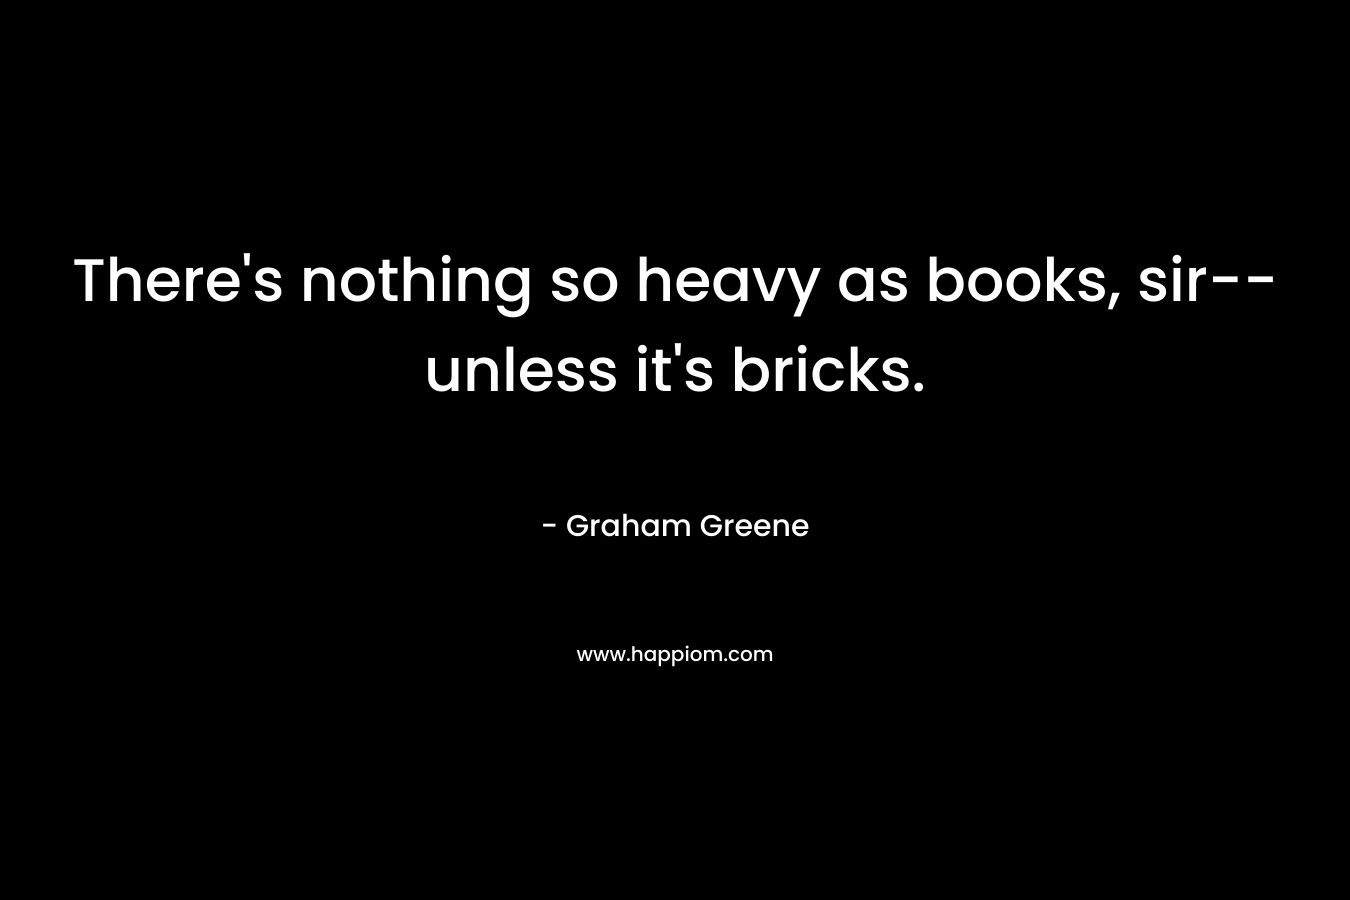 There's nothing so heavy as books, sir--unless it's bricks.